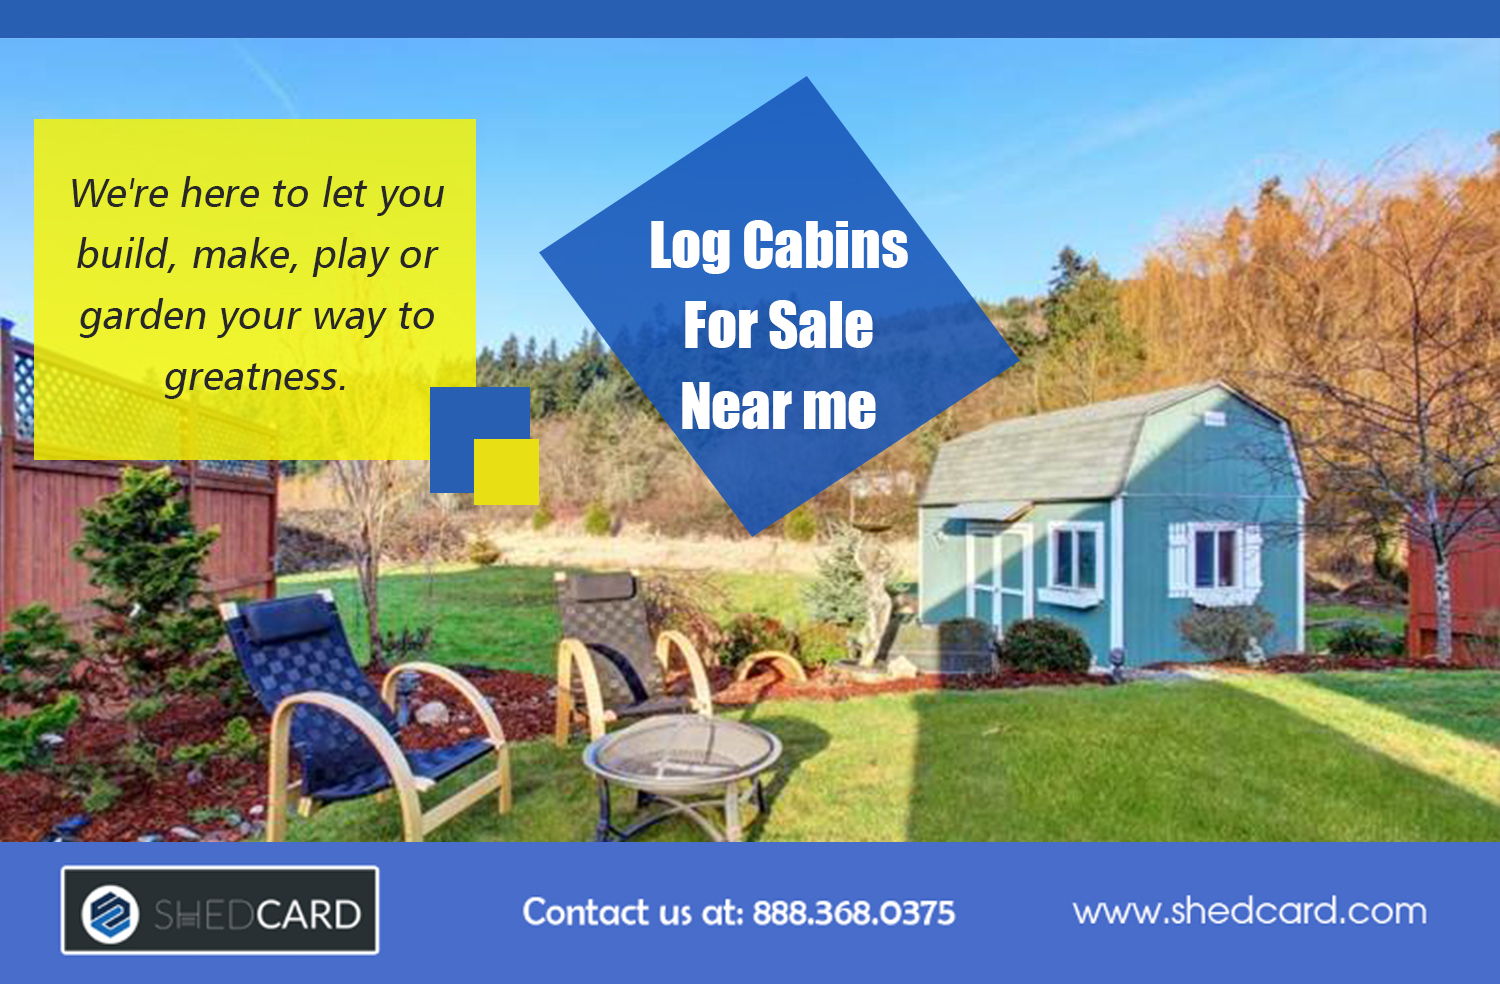 Log Cabins For Sale Near Me 1529127444cp4l8 